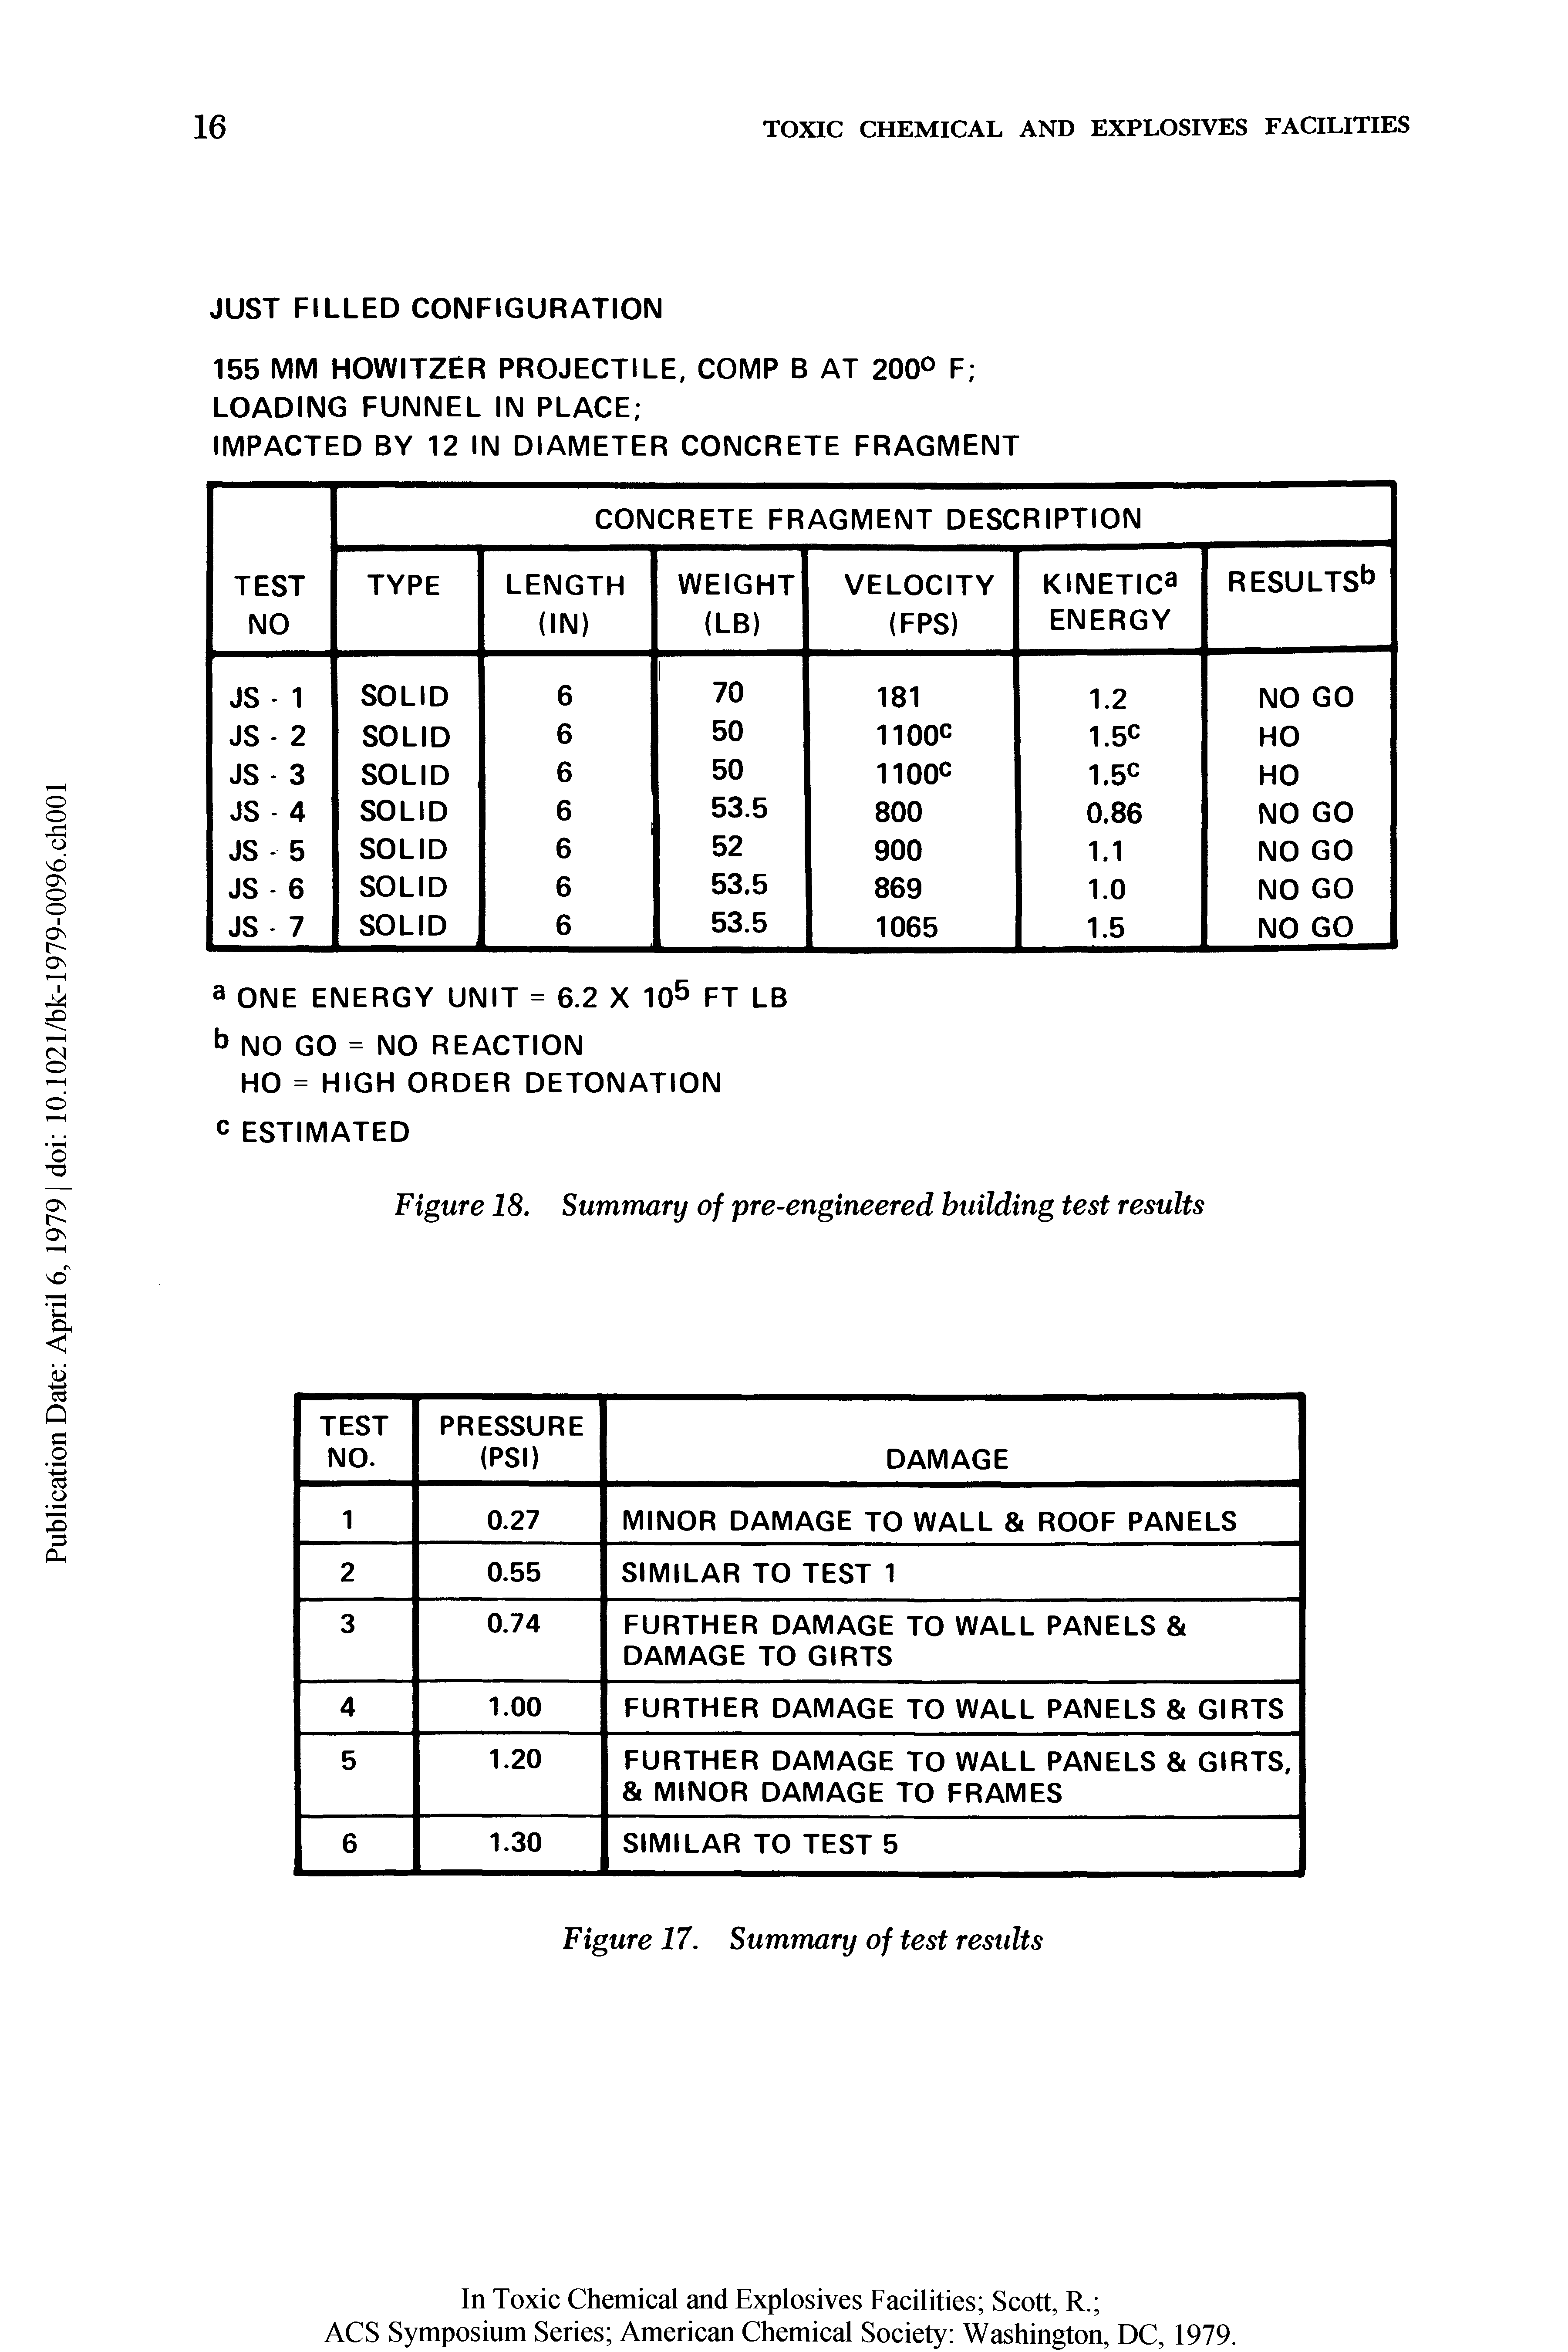 Figure 18. Summary of pre-engineered building test results...